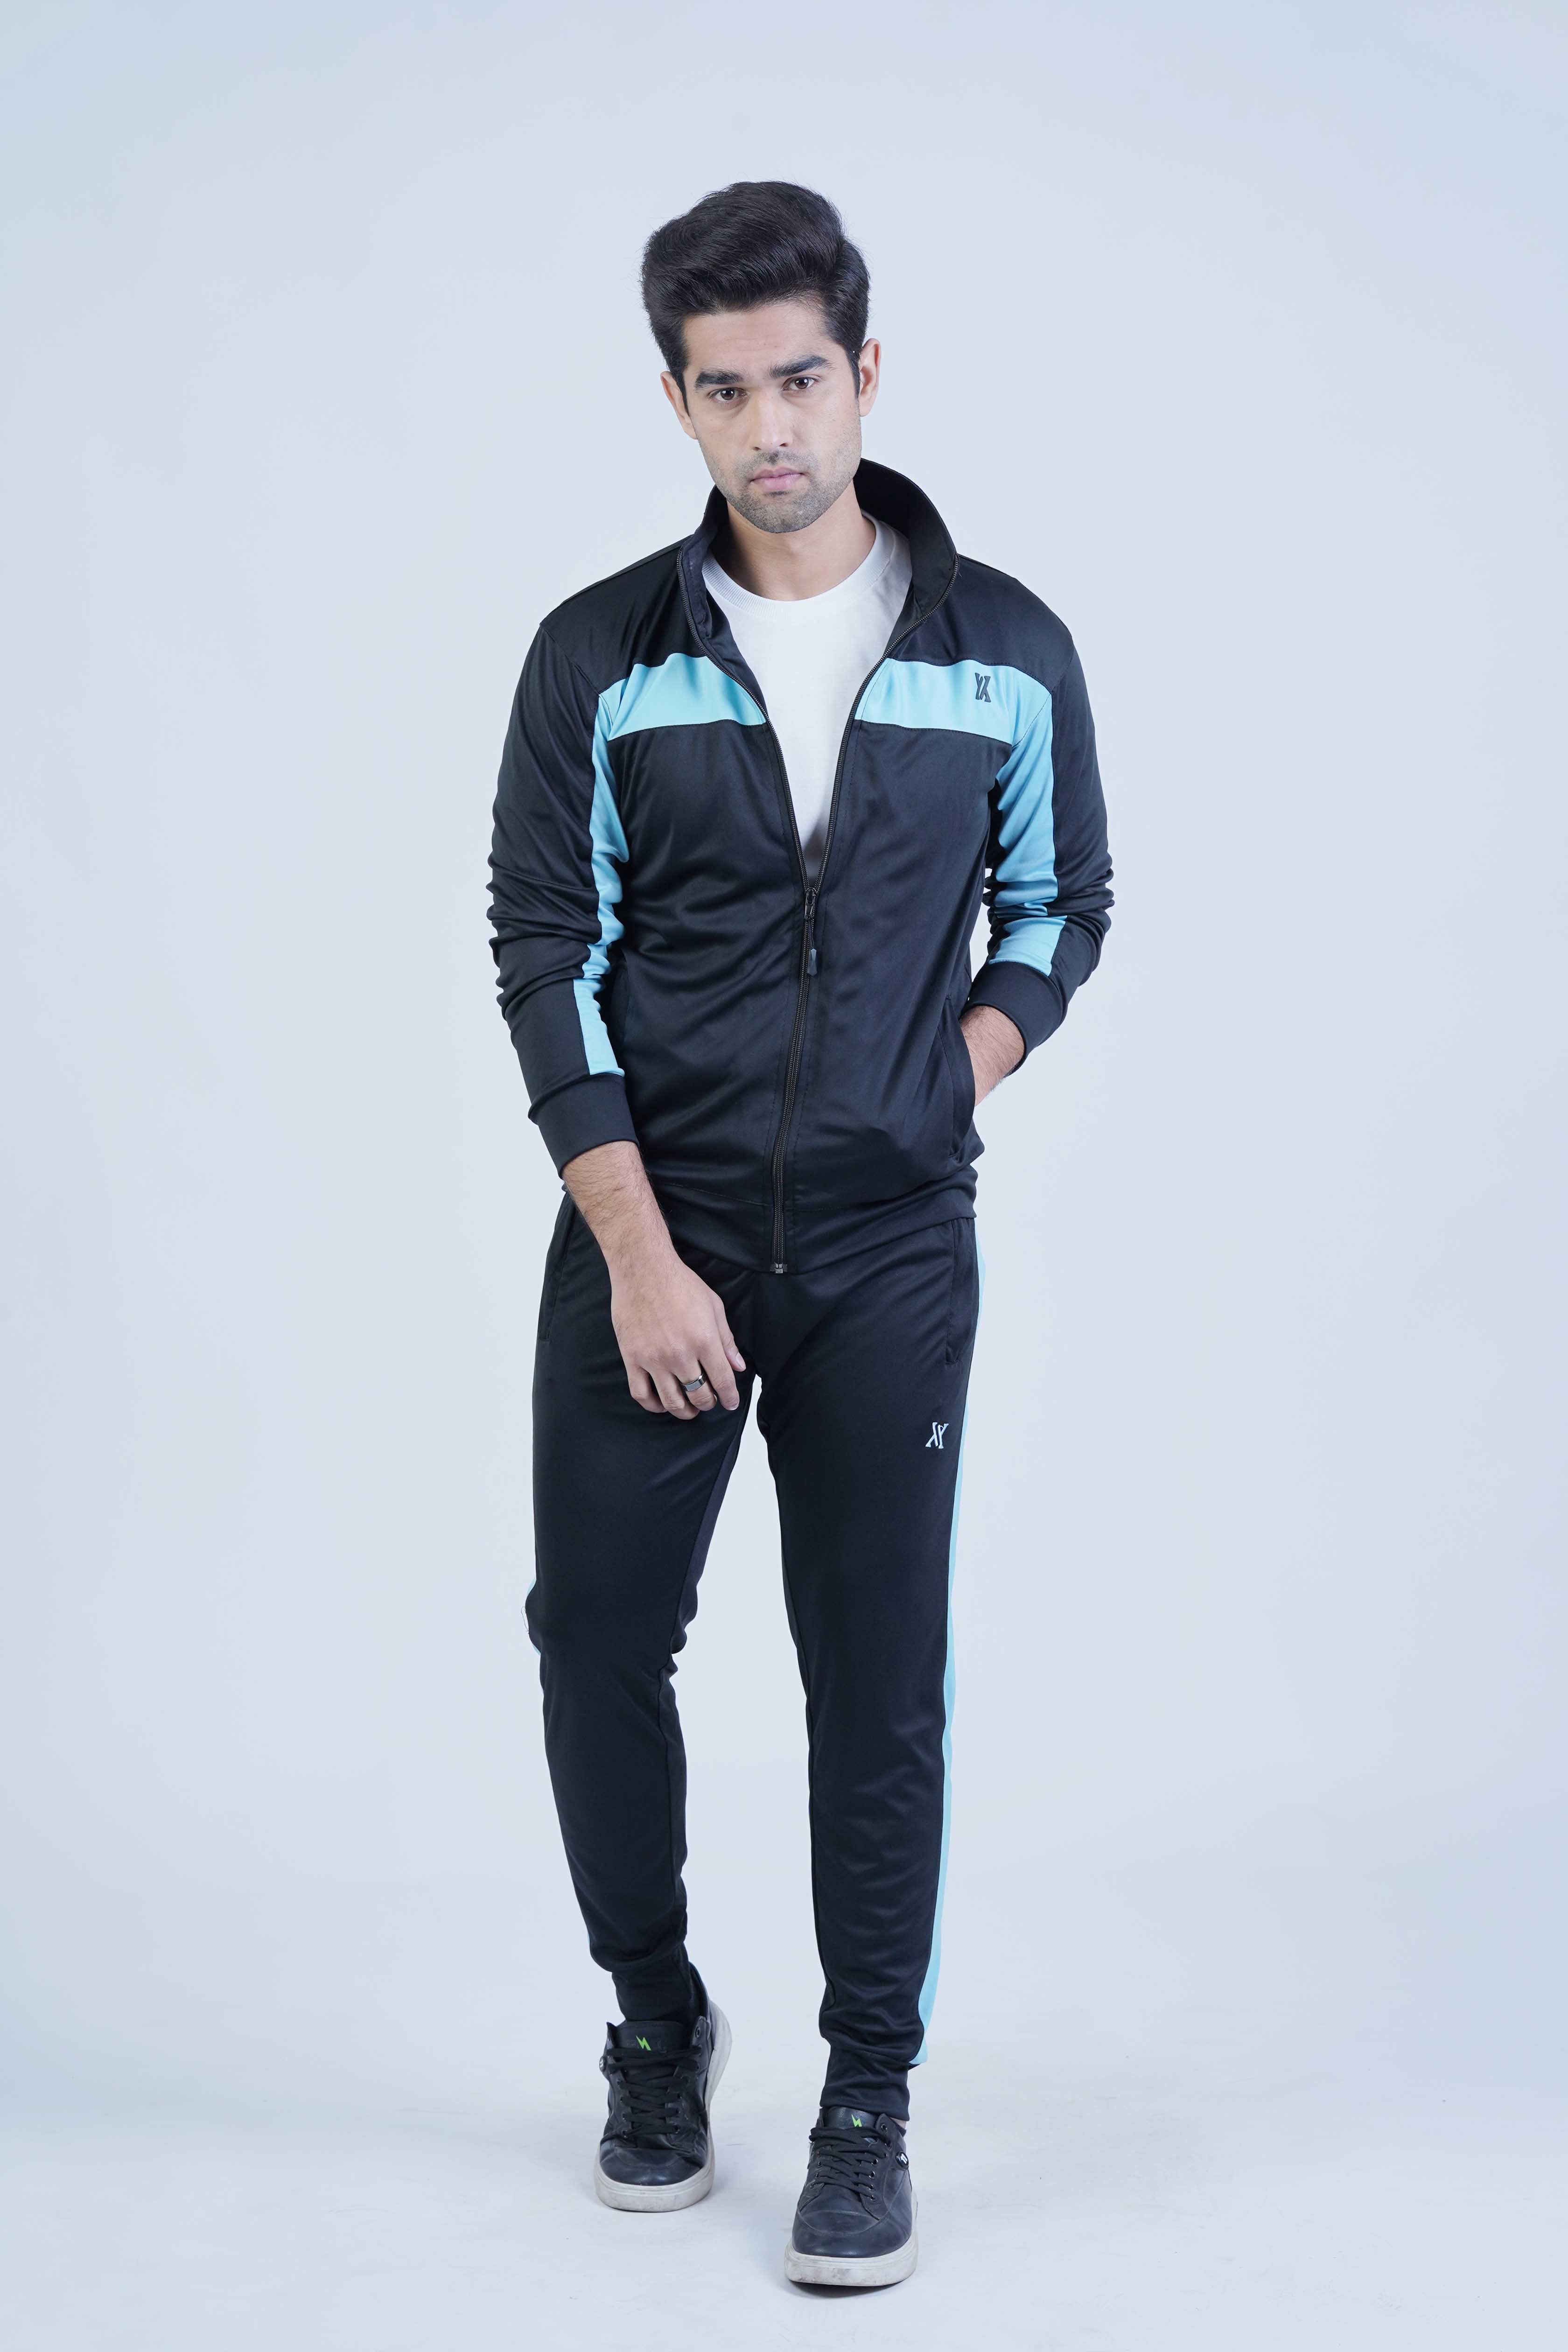 Athleisure Trend Tracksuit - The Xea Men's Clothing: Stylish Comfort for Every Occasion